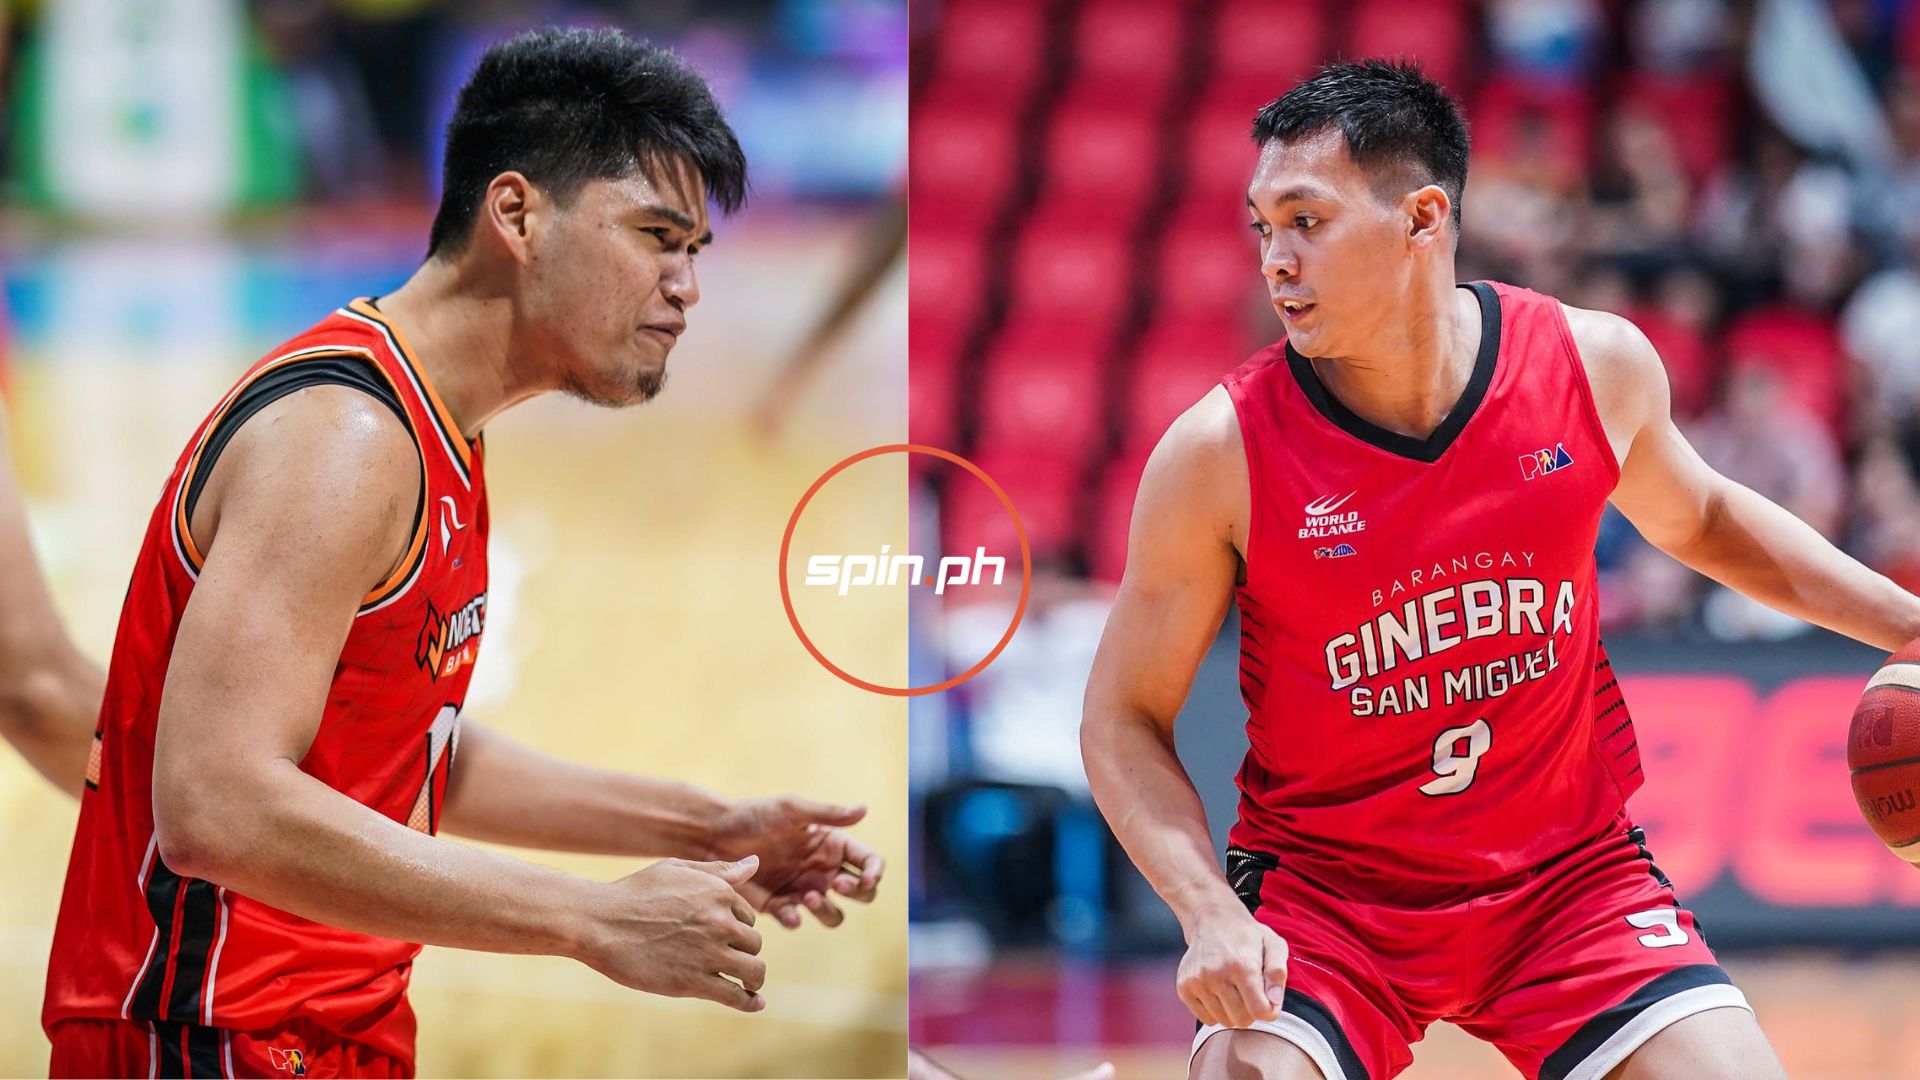 northport faces test against ginebra: what to watch out for